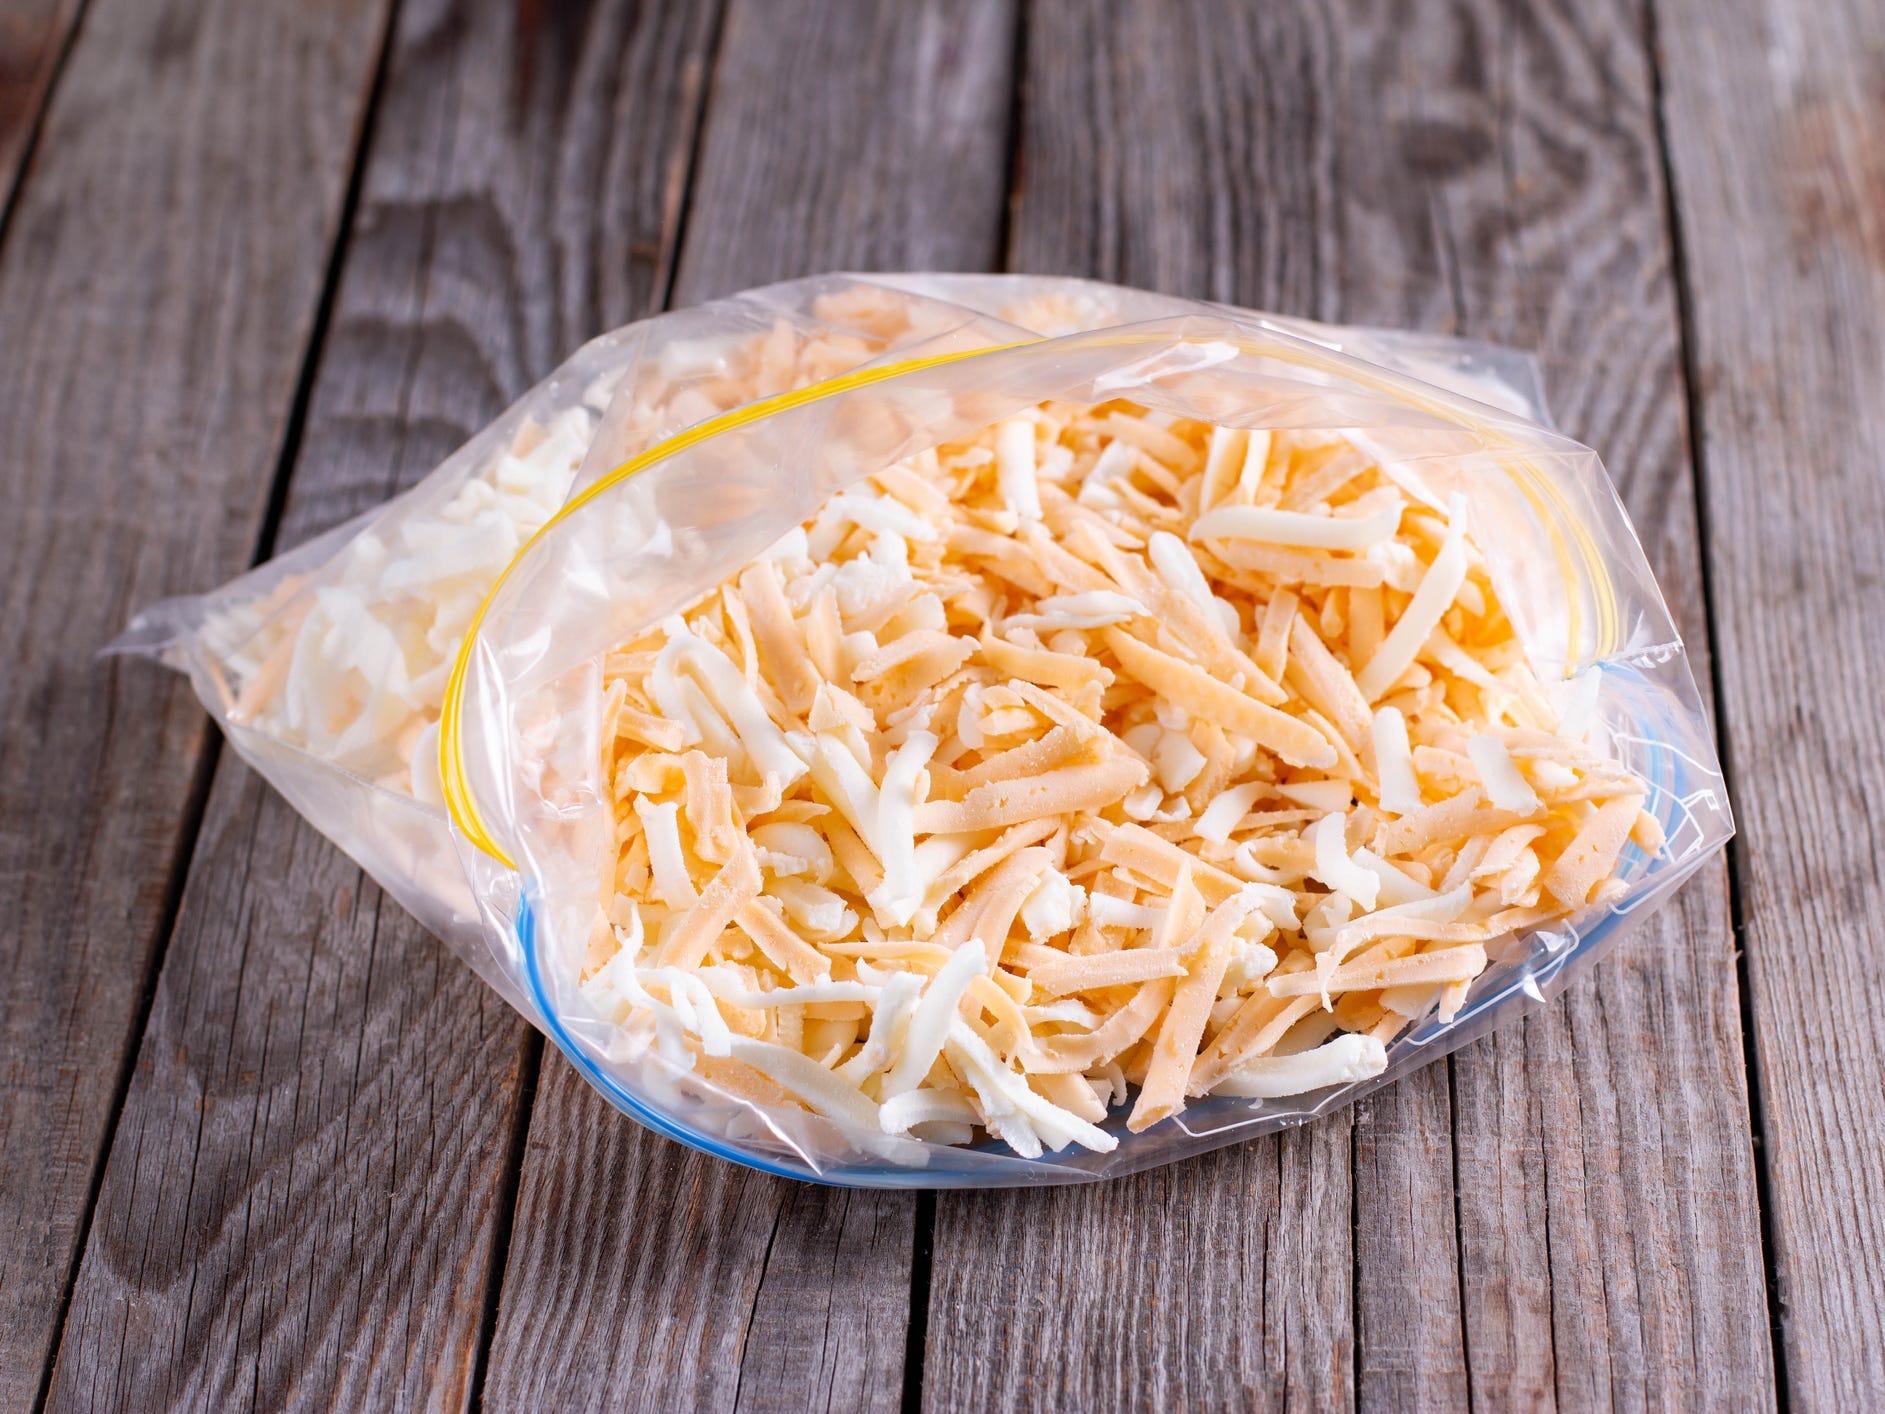 Frozen shredded cheese in an open baggie on a wooden table